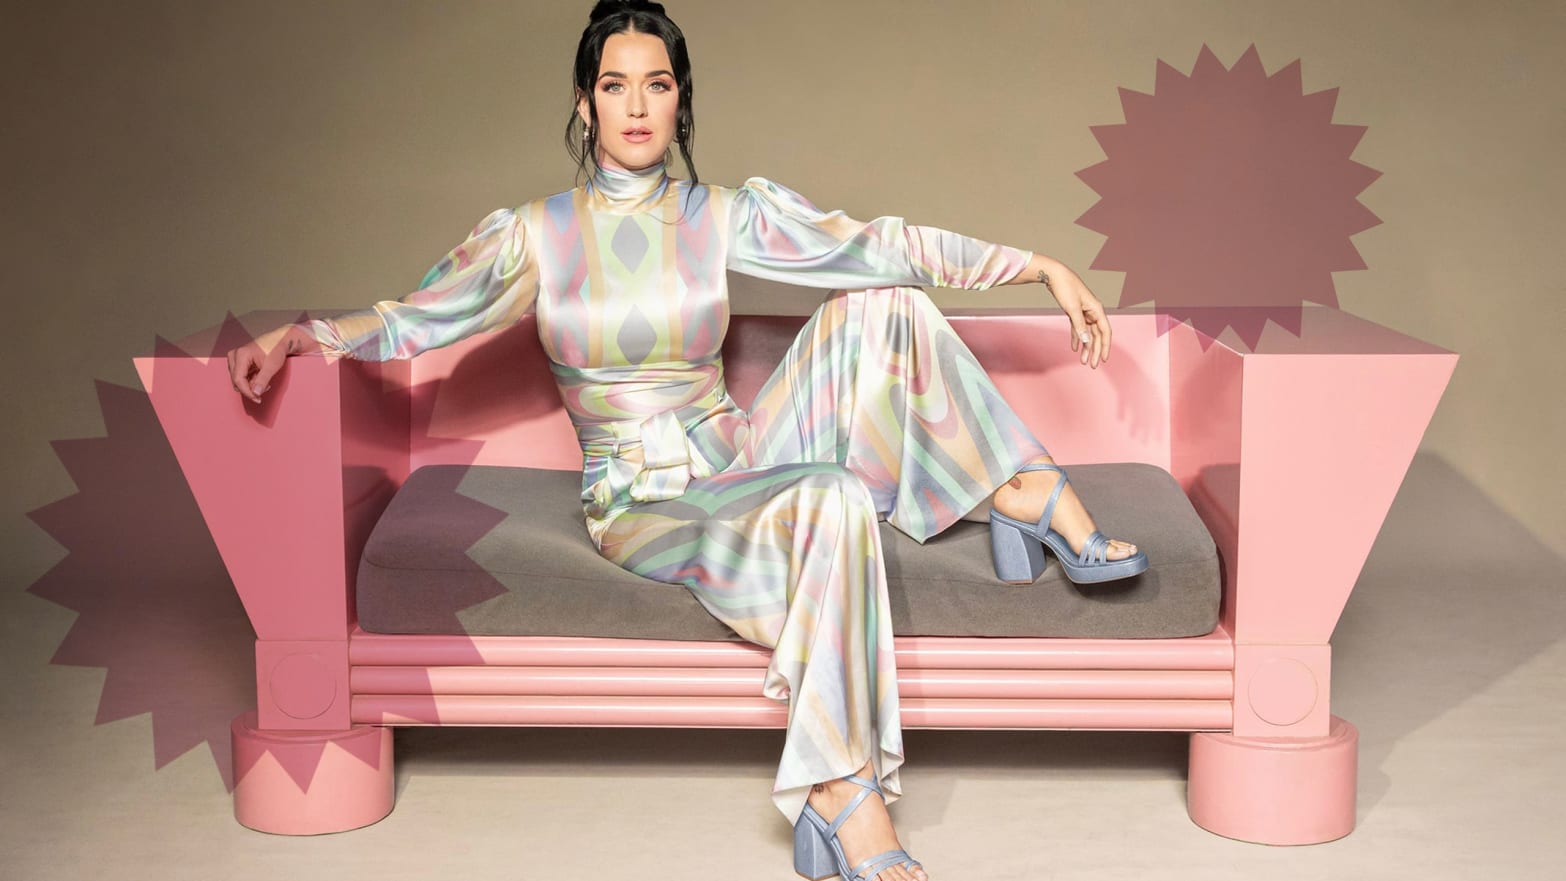 Katy Perry spring shoe collection